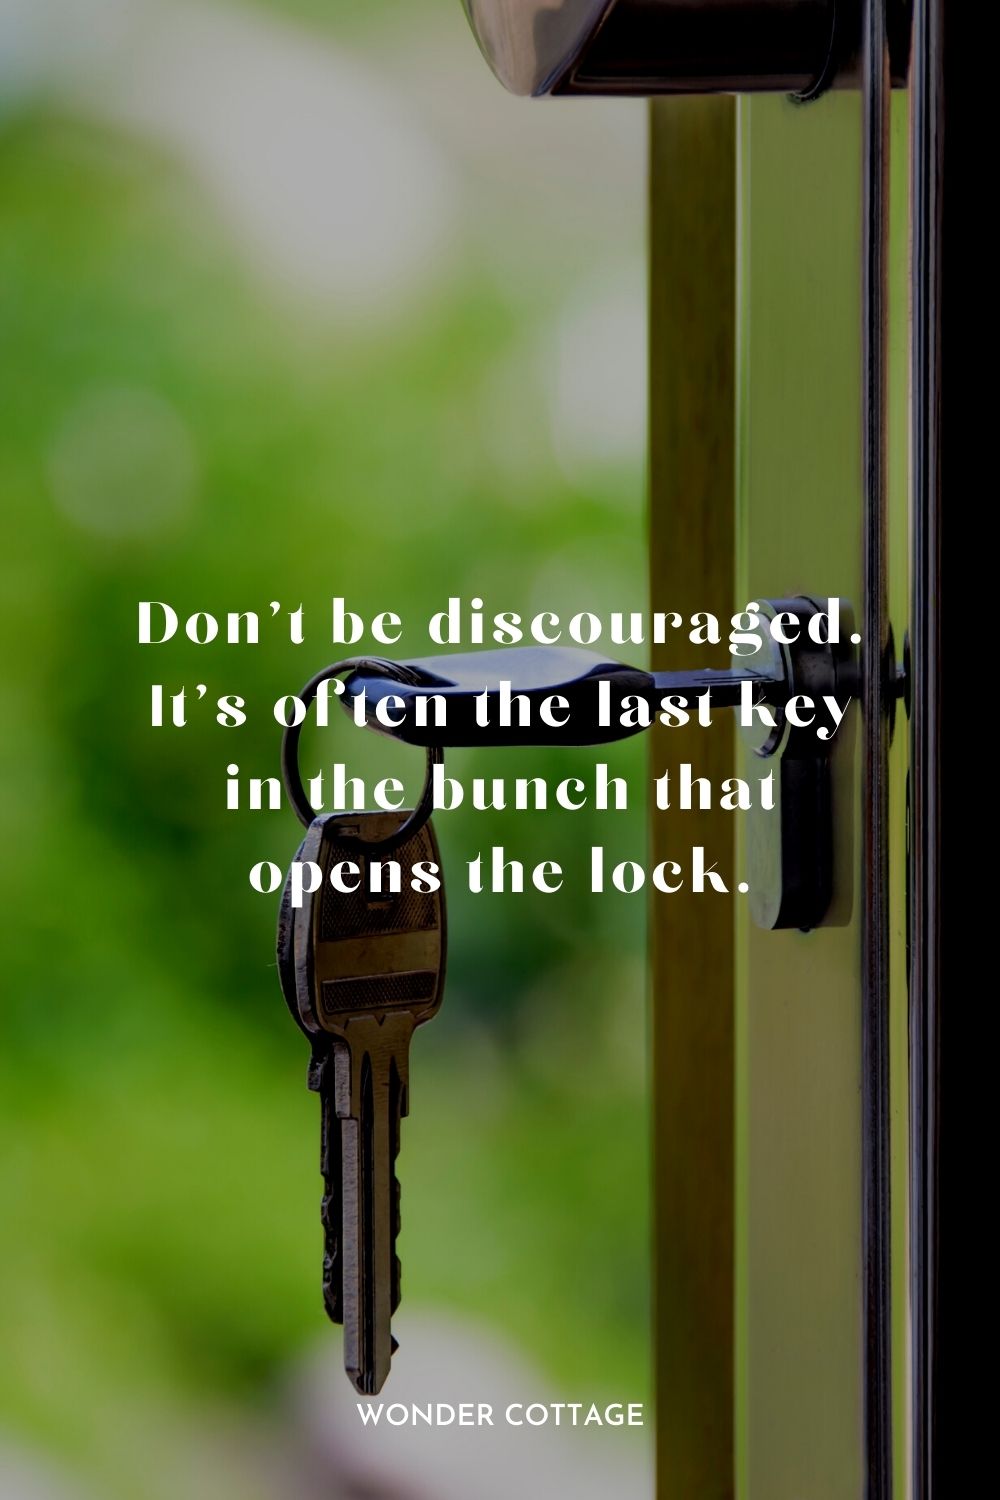 Don’t be discouraged. It’s often the last key in the bunch that opens the lock. Author Unknown